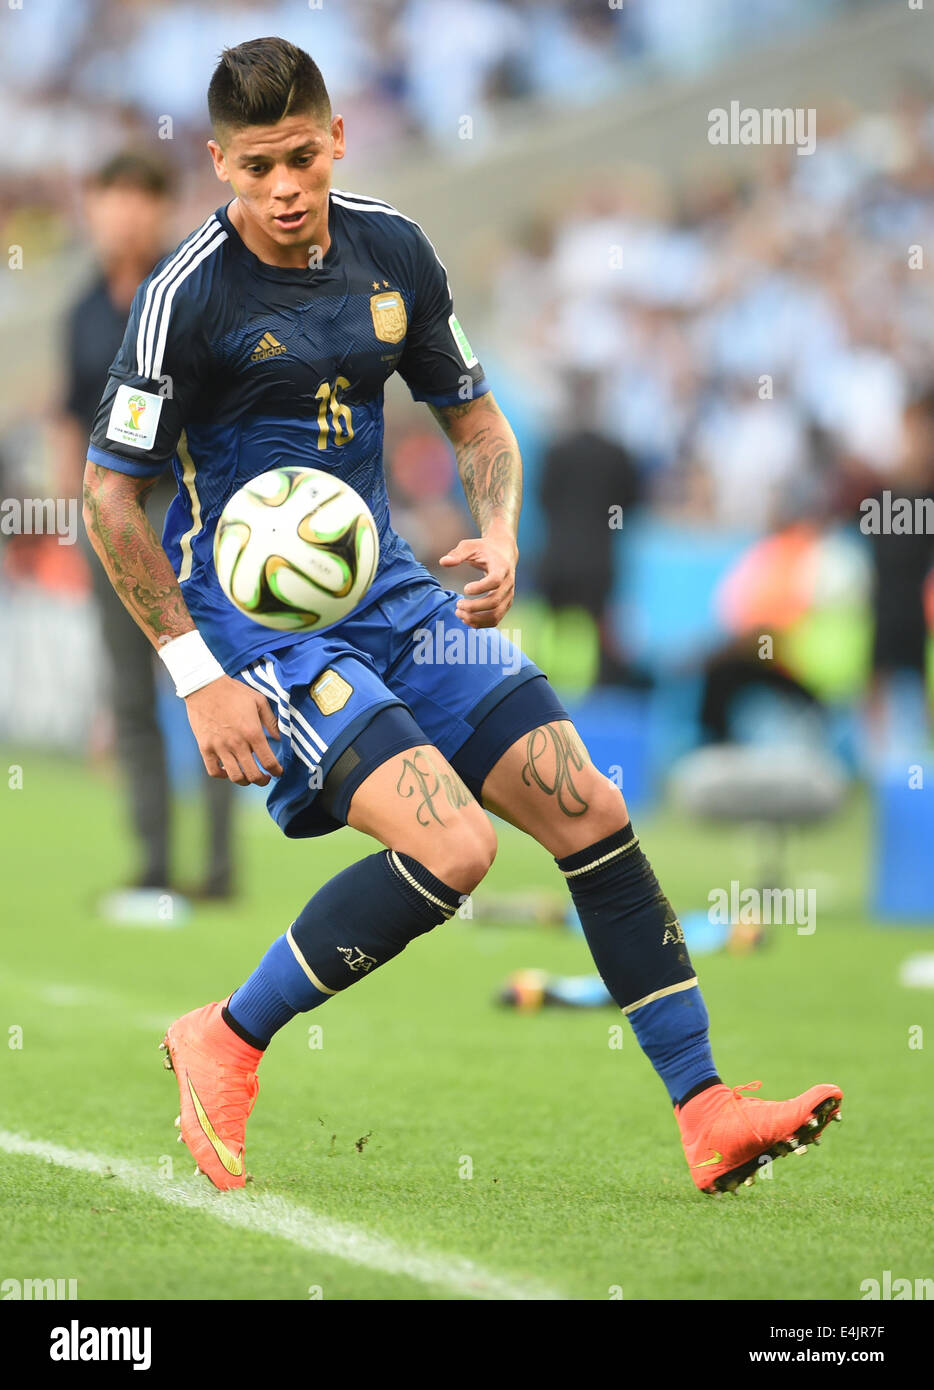 Rio de Janeiro, Brazil. 13th July, 2014. Marcos Rojo of Argentina in action during the FIFA World Cup 2014 final soccer match between Germany and Argentina at the Estadio do Maracana in Rio de Janeiro, Brazil, 13 July 2014. Photo: Andreas Gebert/dpa/Alamy Live News Stock Photo